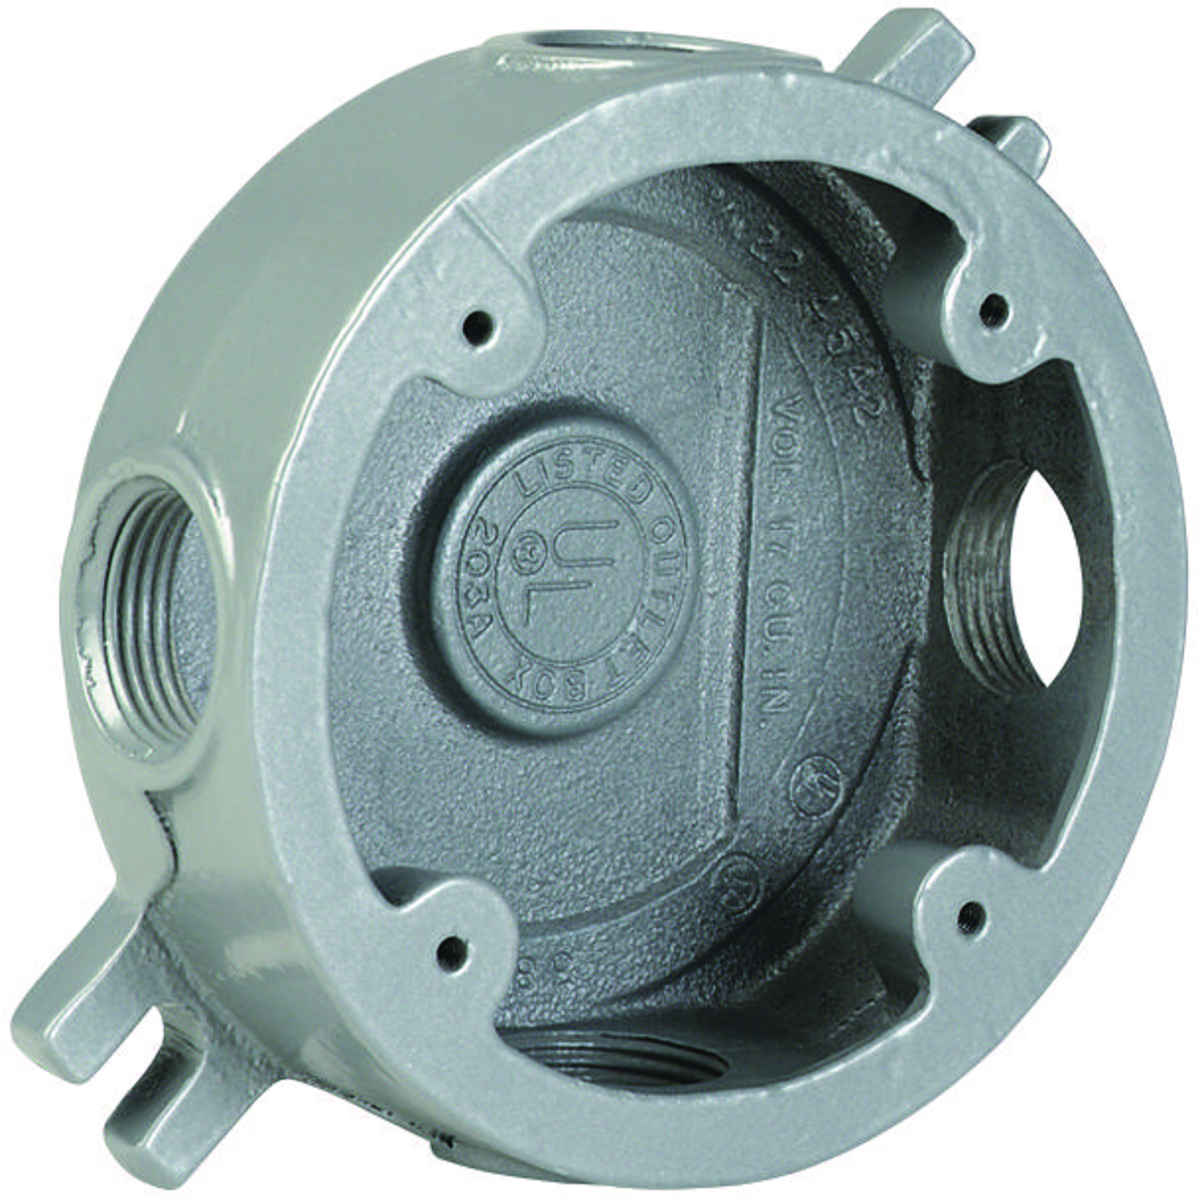 ROUND OUTLET 1-5/8" 1/2" HUB